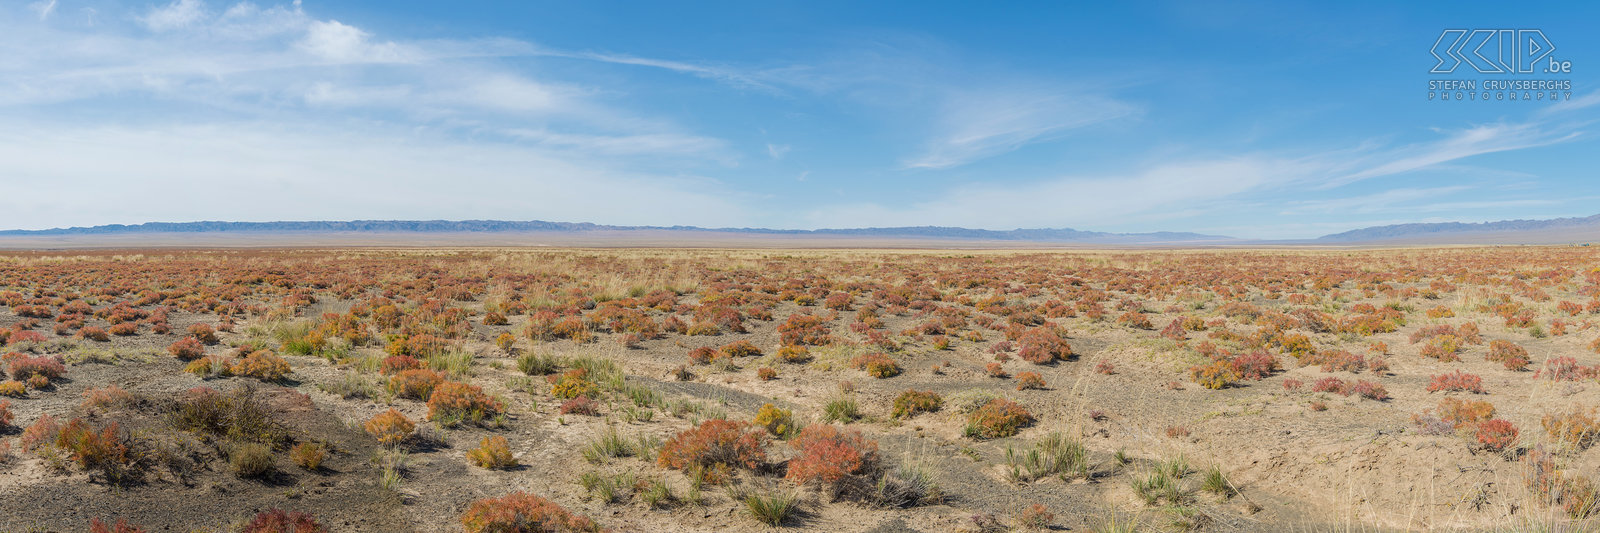 Gobi Vast steppe plains in the Gobi desert with many shrubs in orange and red autumn colors. Stefan Cruysberghs